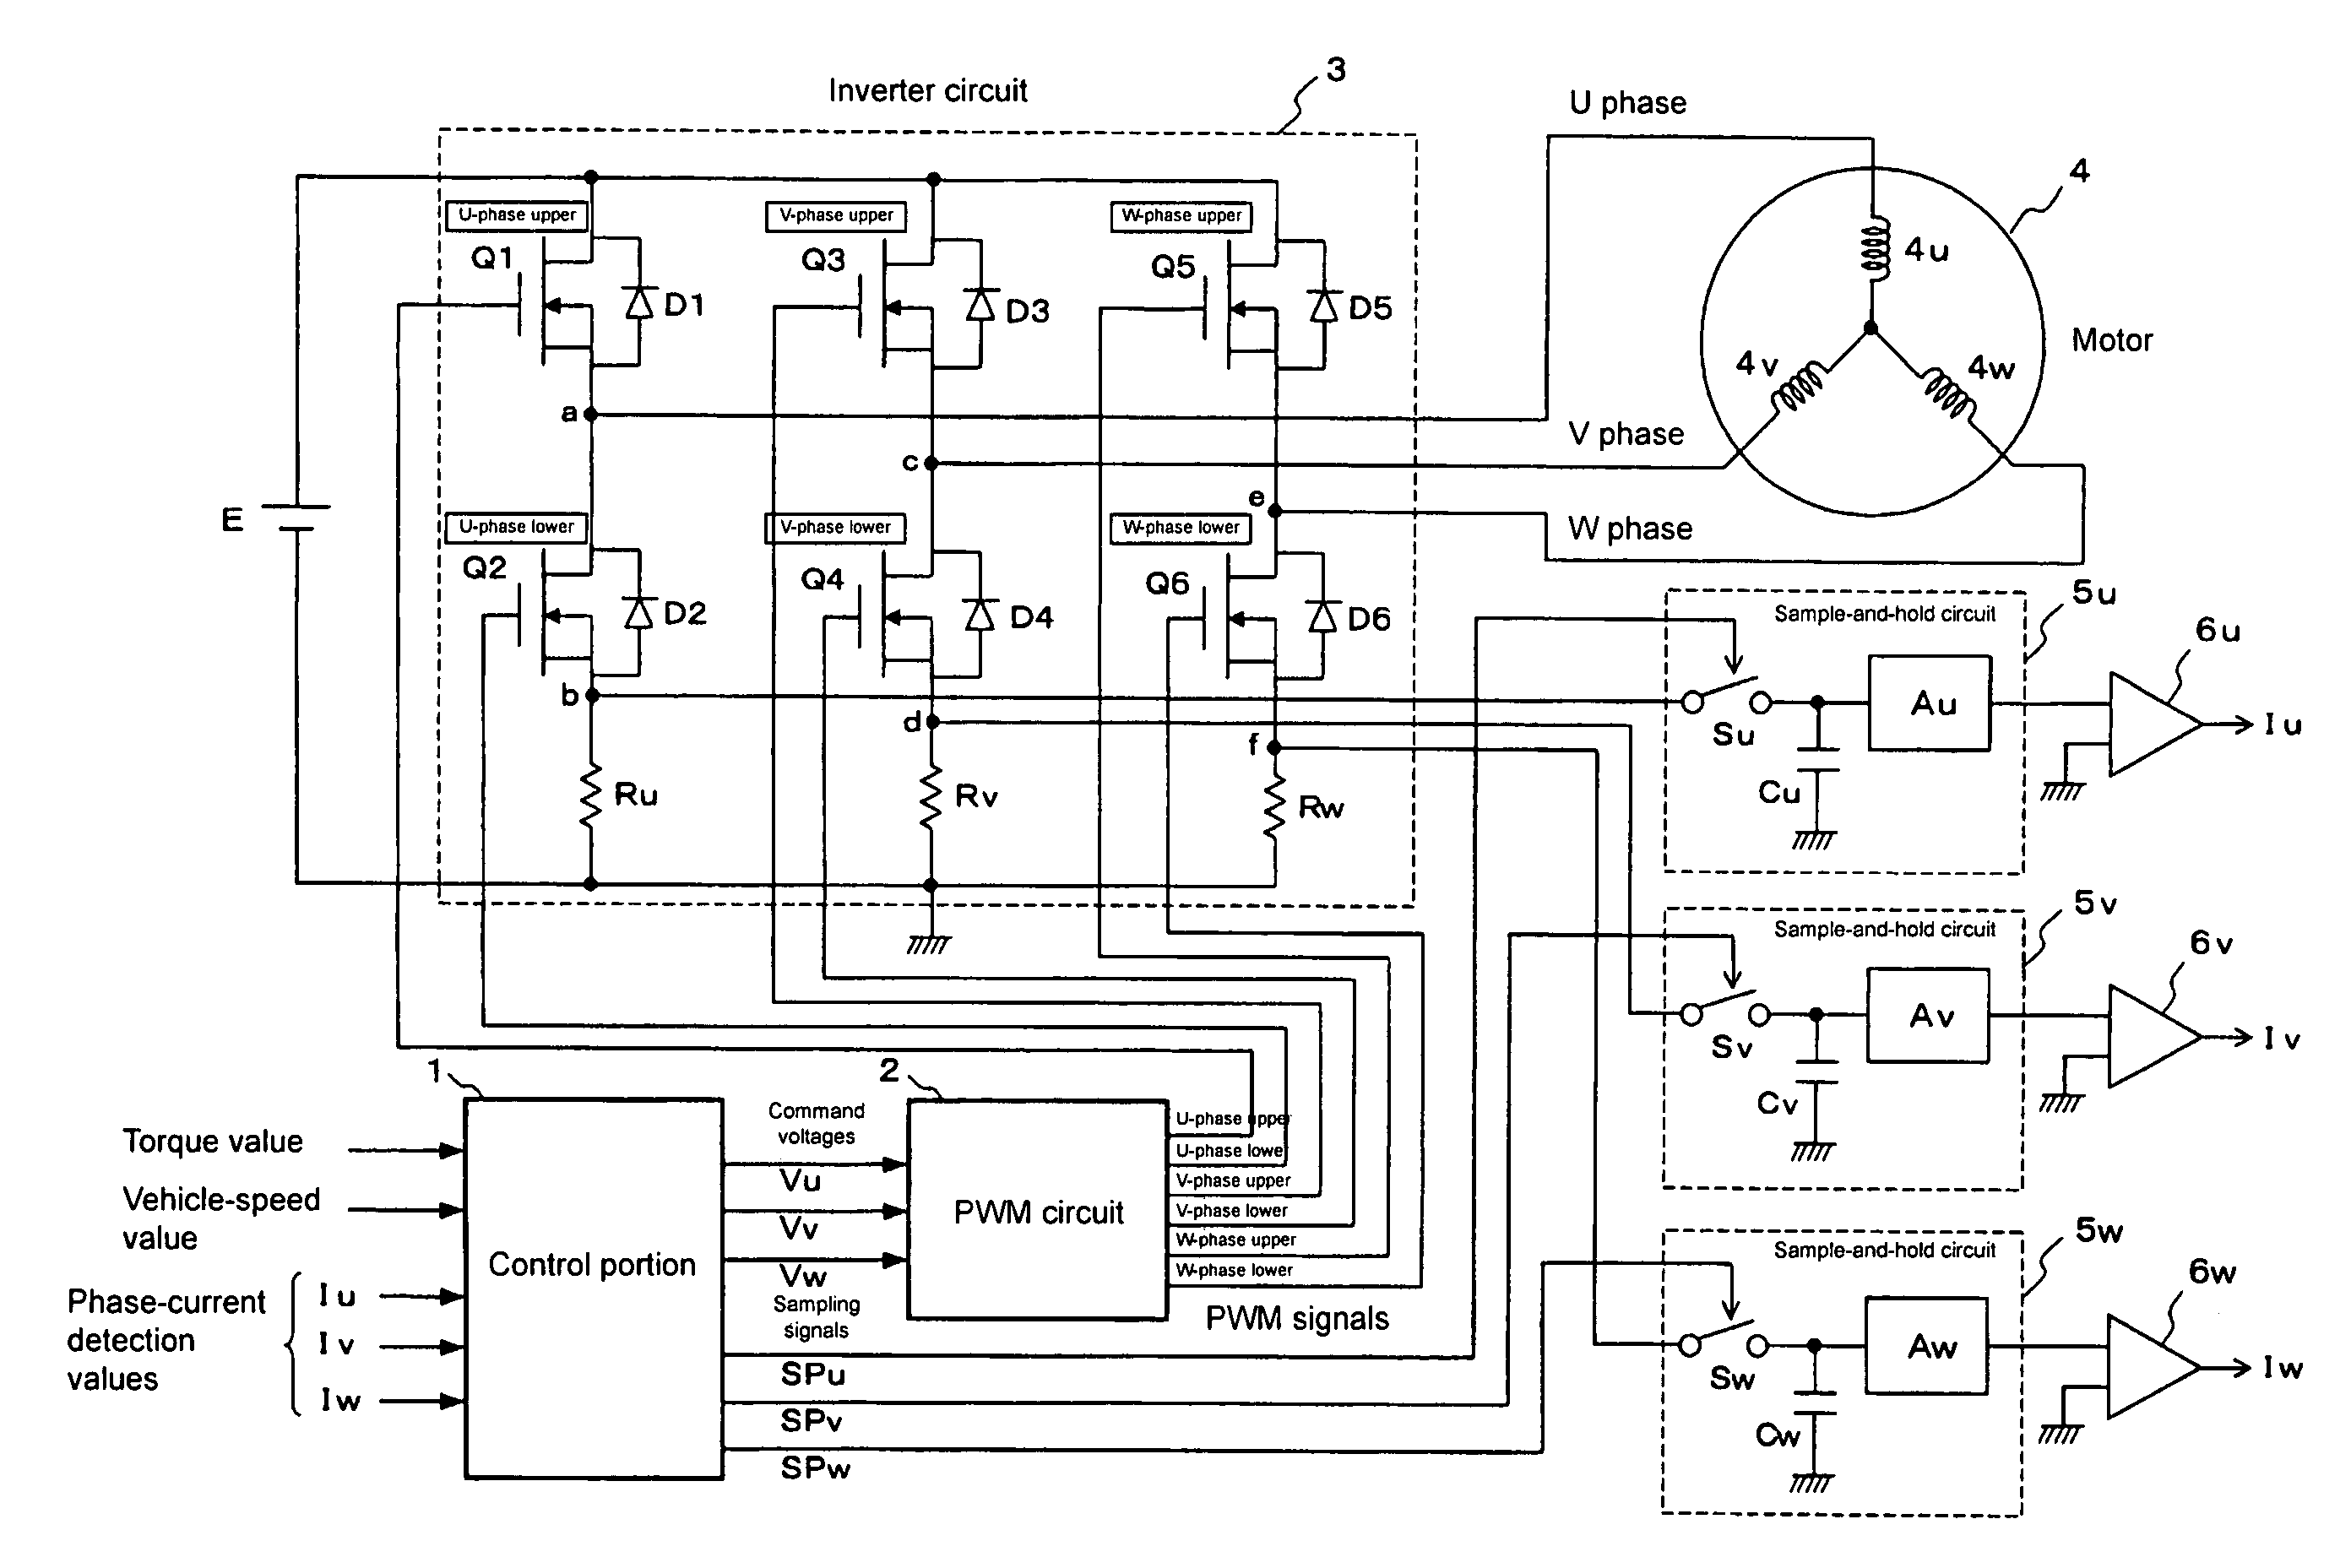 Inverter circuit with switching deadtime synchronized sample and hold current detection